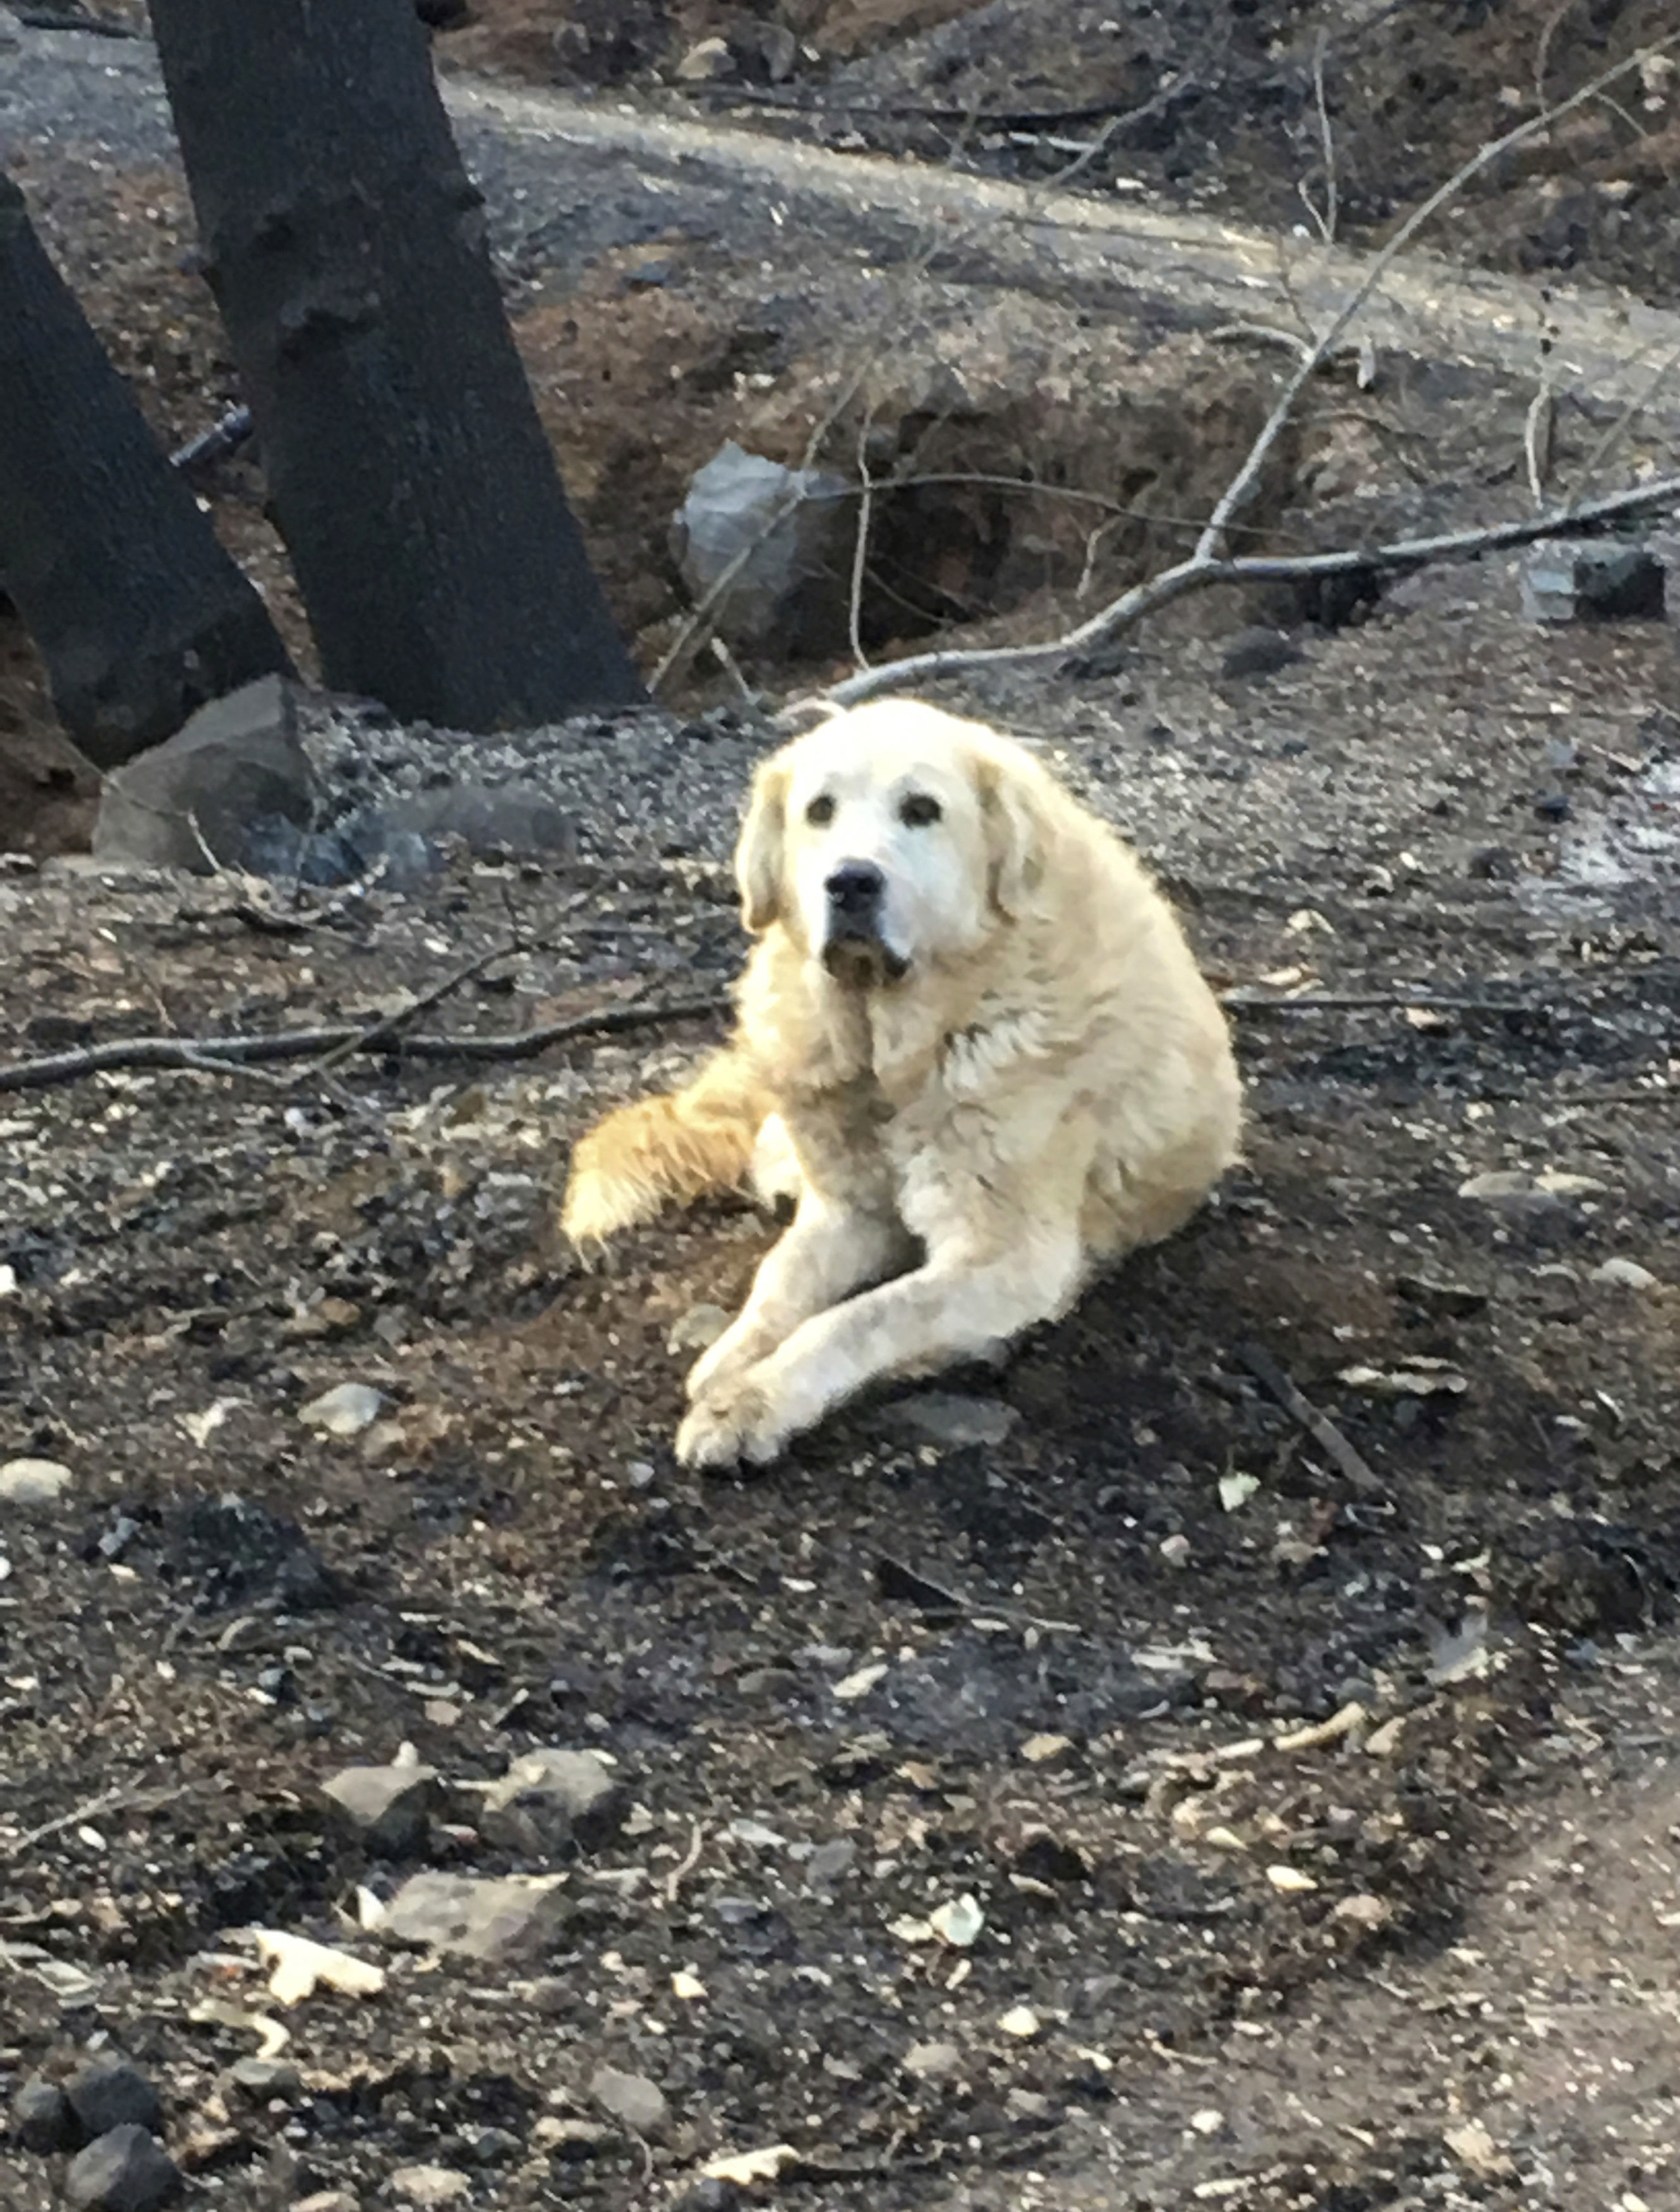 photo provided Shayla Sullivan shows "Madison," the Anatolian shepherd dog that apparently guarded his burned home for nearly a month until his owner returned in Paradise, Calif.